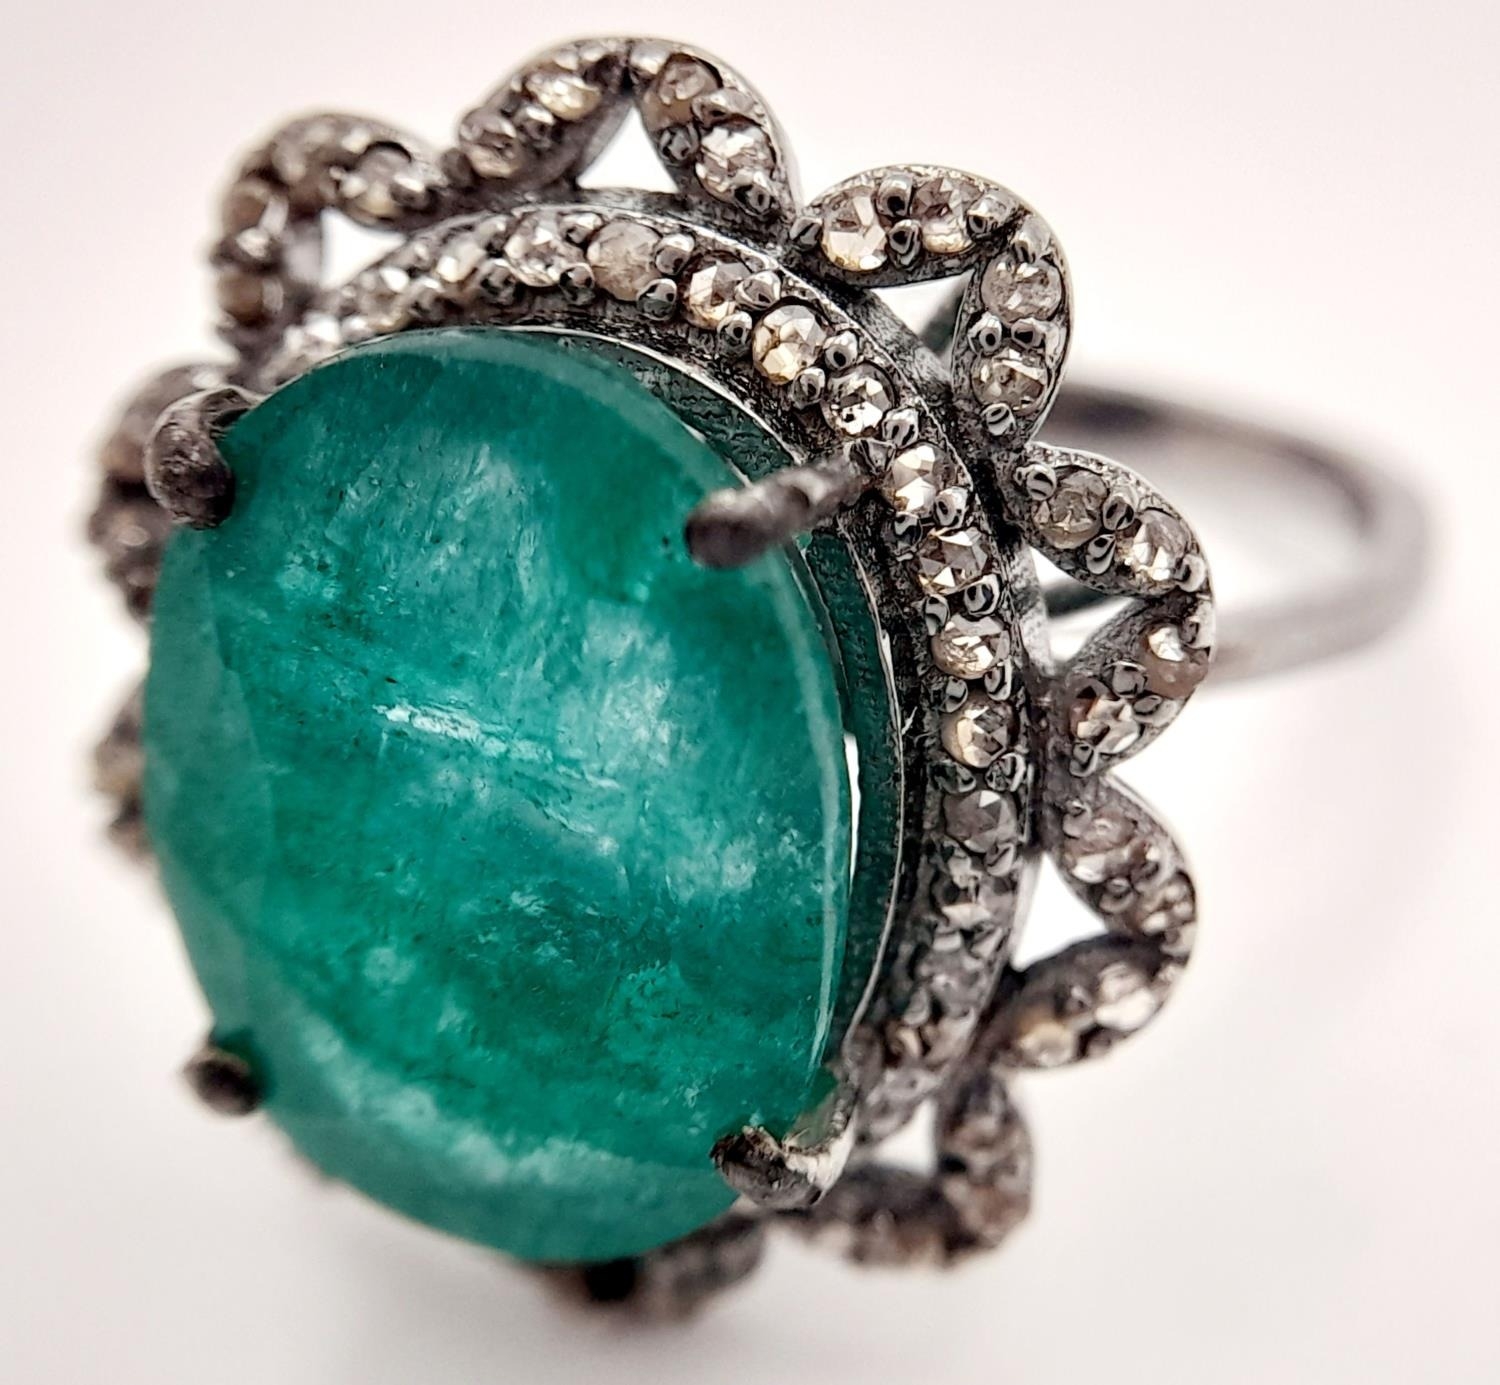 A 6.15ct Emerald Ring with 0.75ctw of Diamond Accents. Set in 925 Silver. Size N. Comes with a - Image 3 of 6